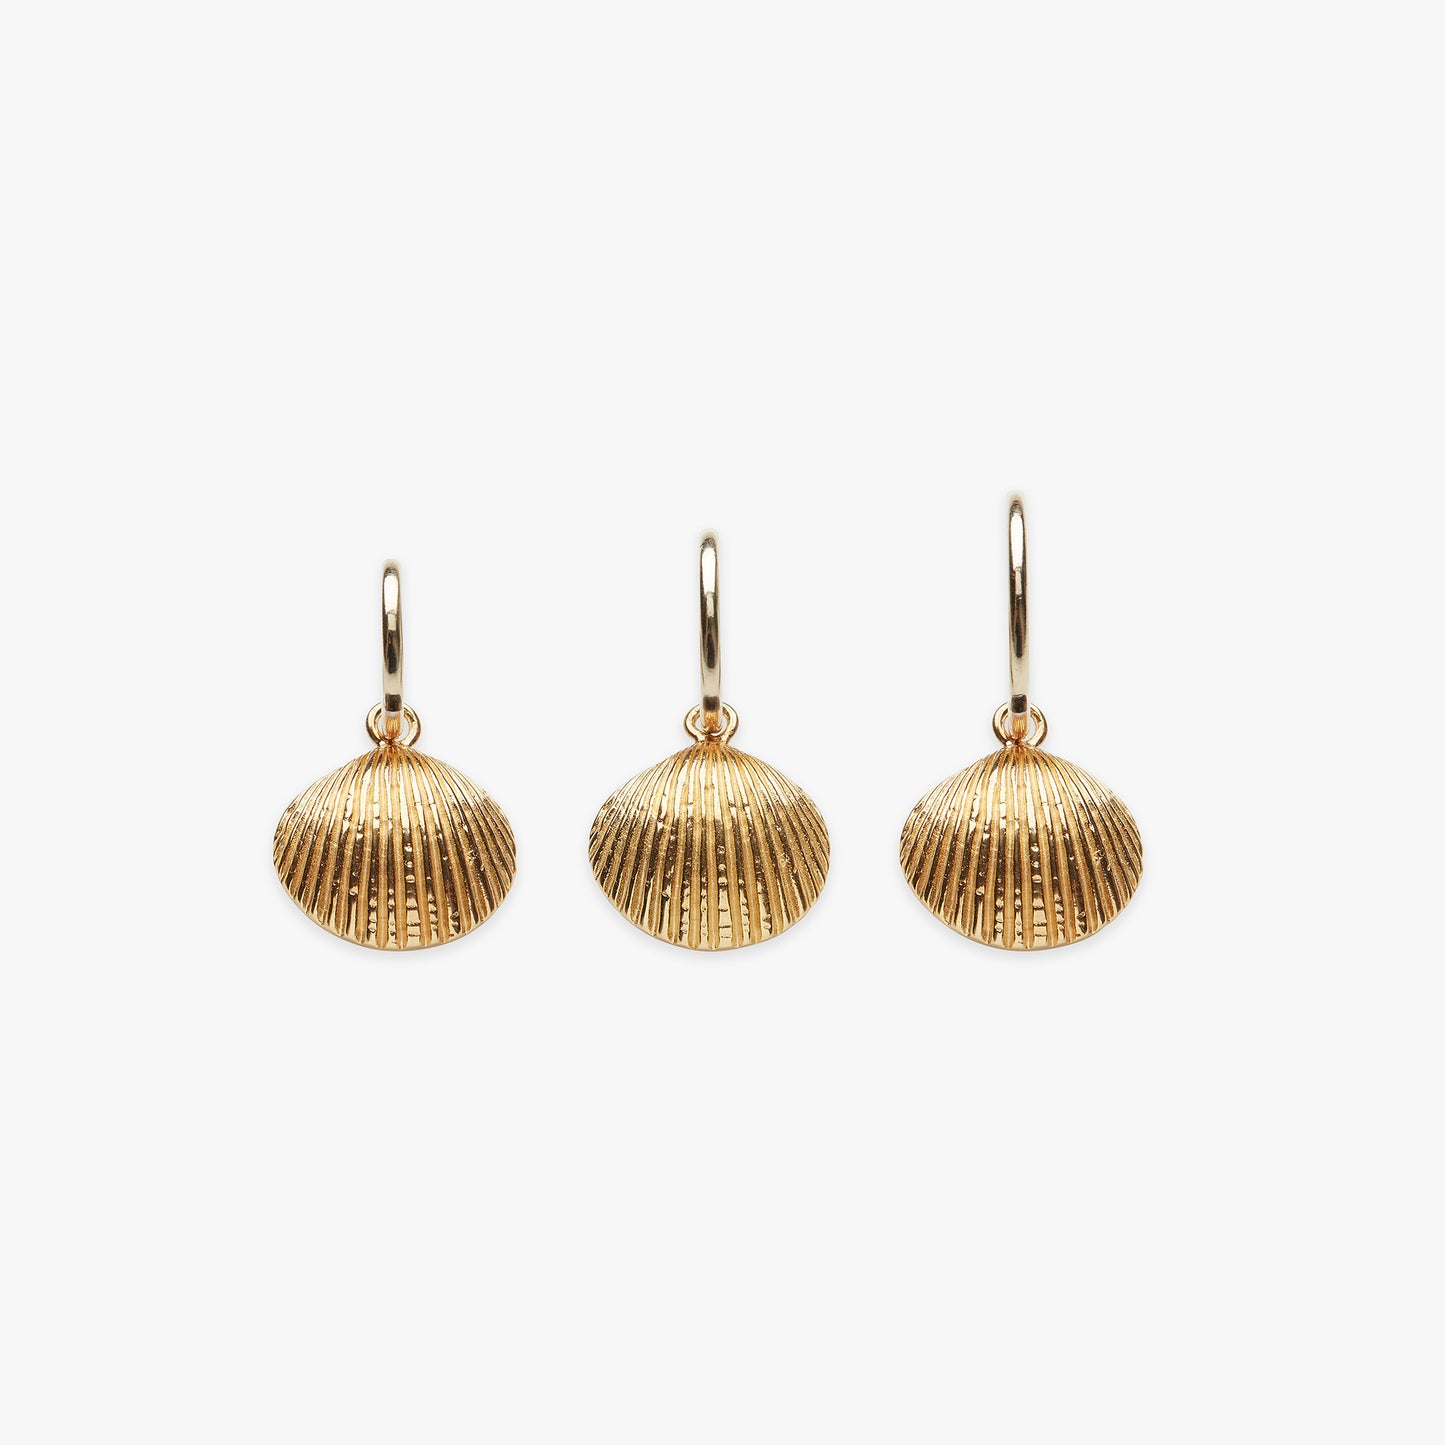 Cockle shell pendant earring gold filled